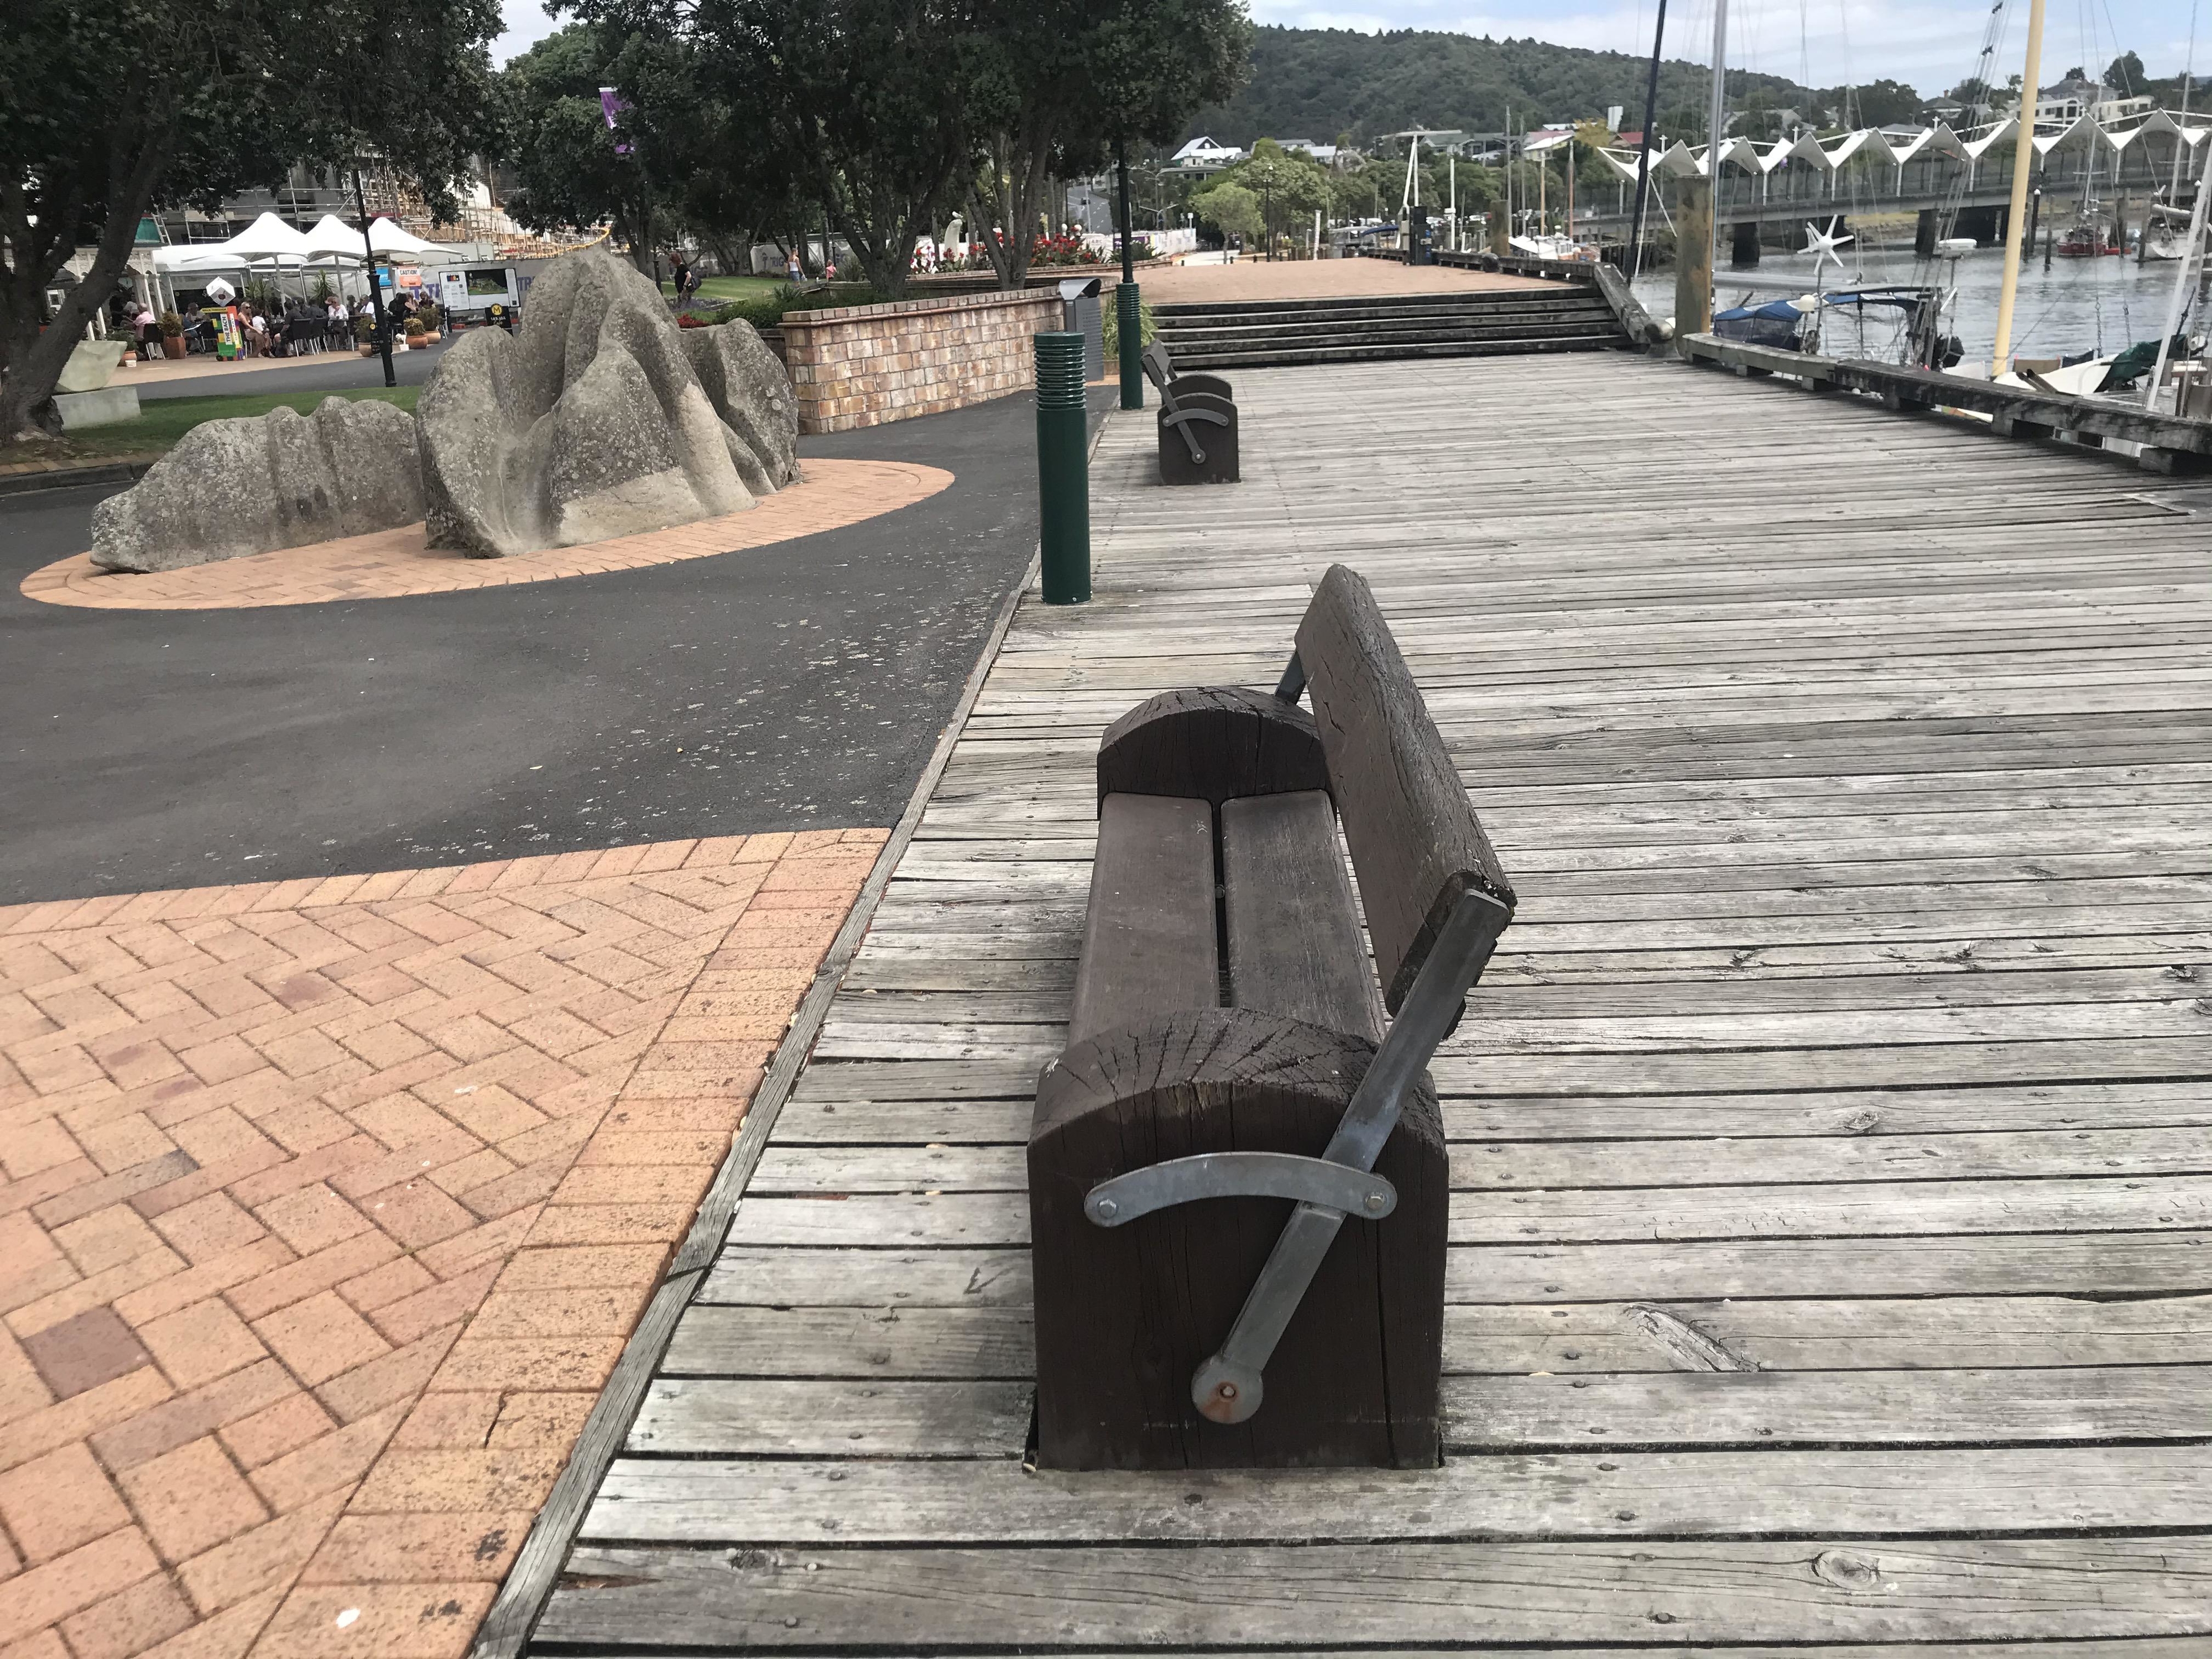 the backs of the benches can be moved to face a different direction